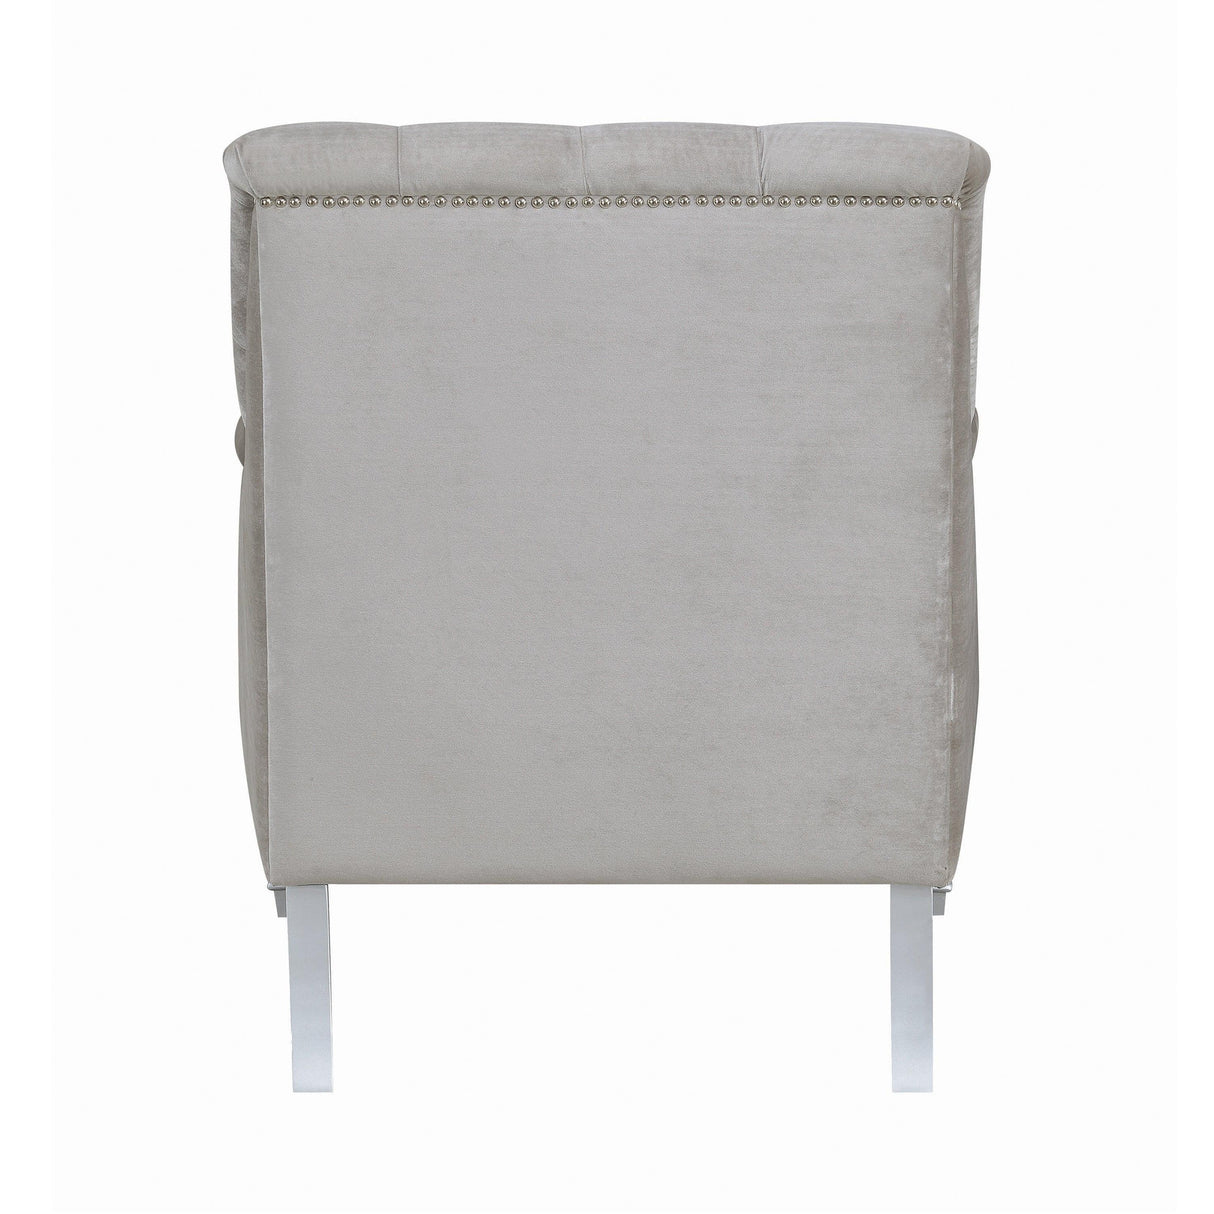 Avonlea Sloped Arm Tufted Chair Grey by Coaster Furniture Coaster Furniture